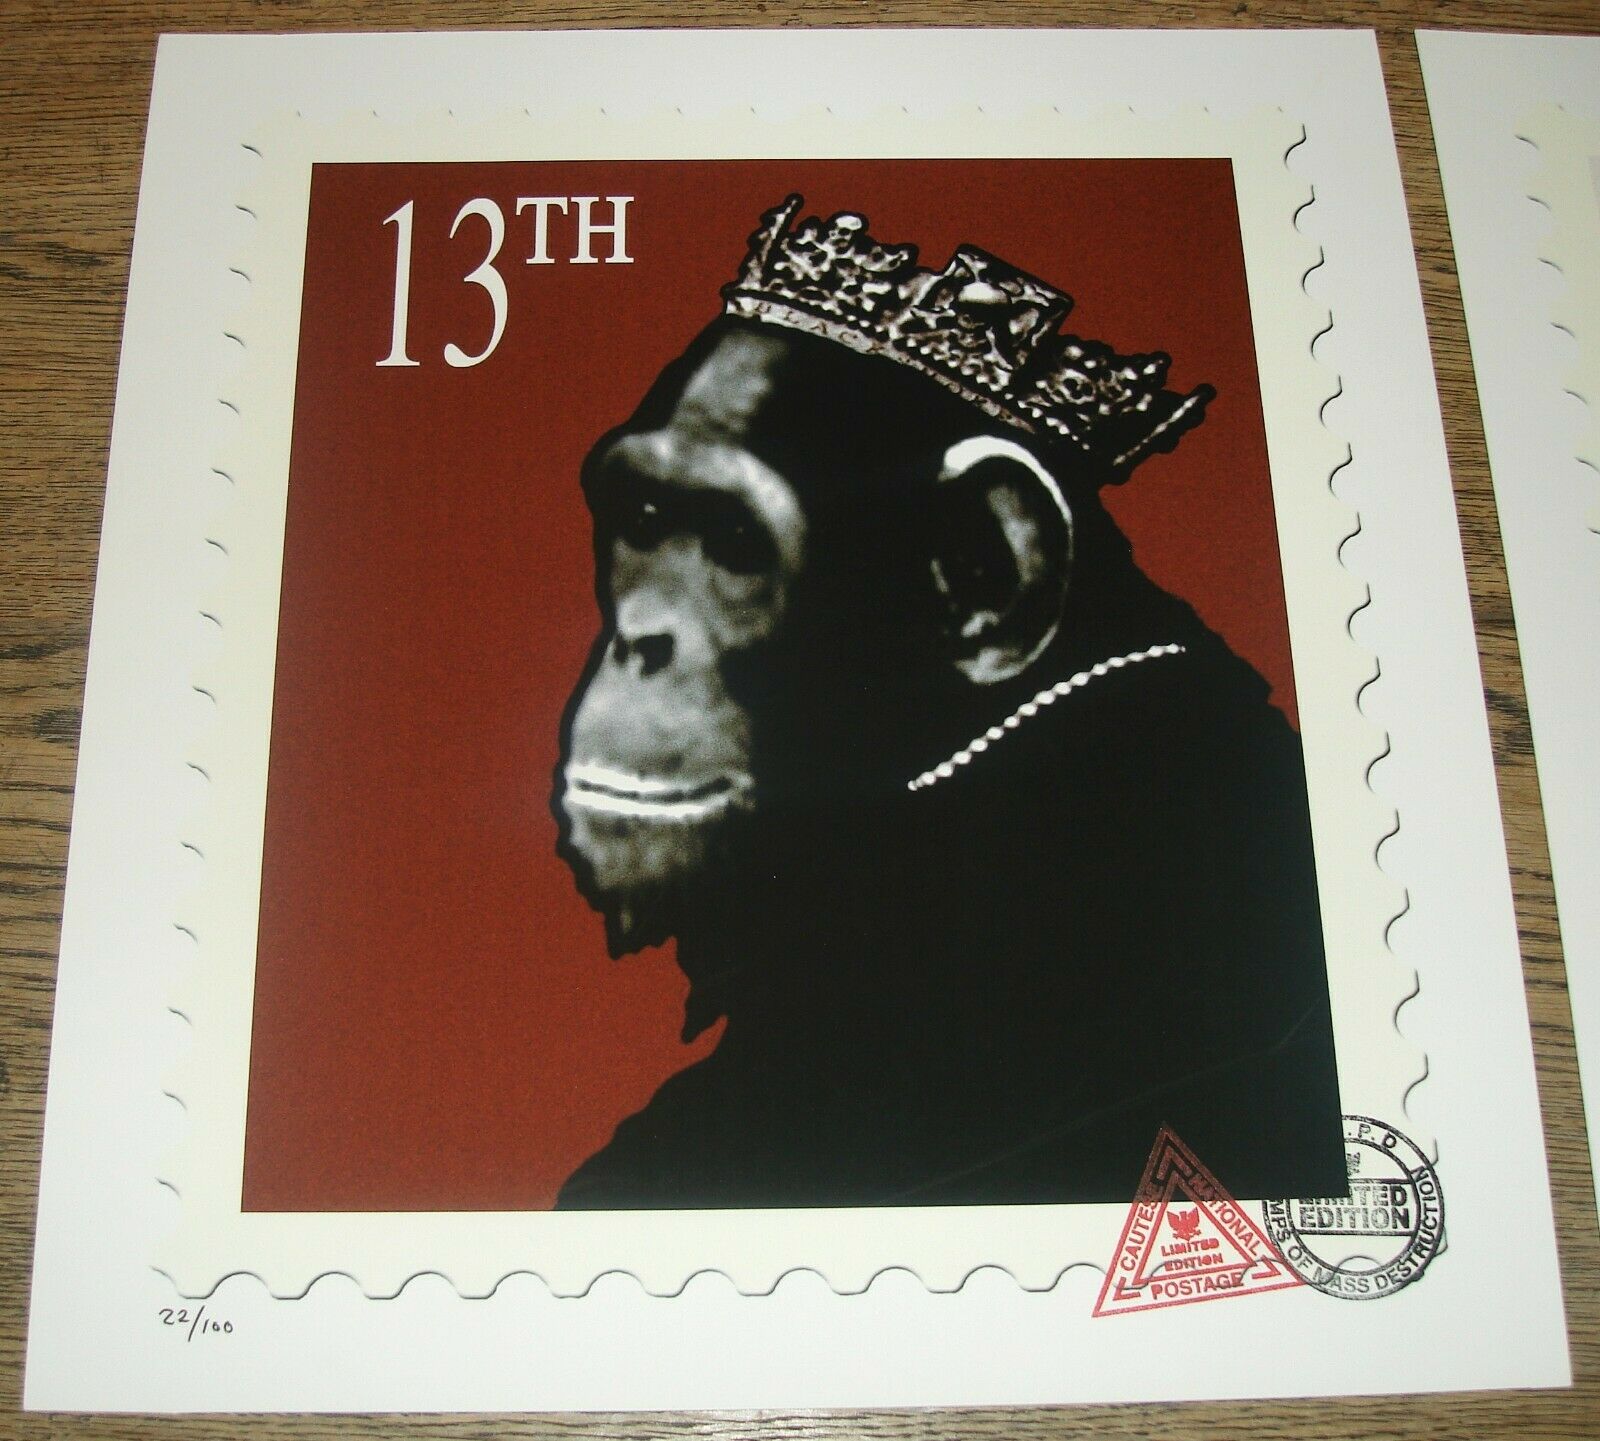 James Cauty - CNPD - Portslade Zoo 13th and 14th Class Pop Editions - Set of 2 with COA - Image 2 of 8